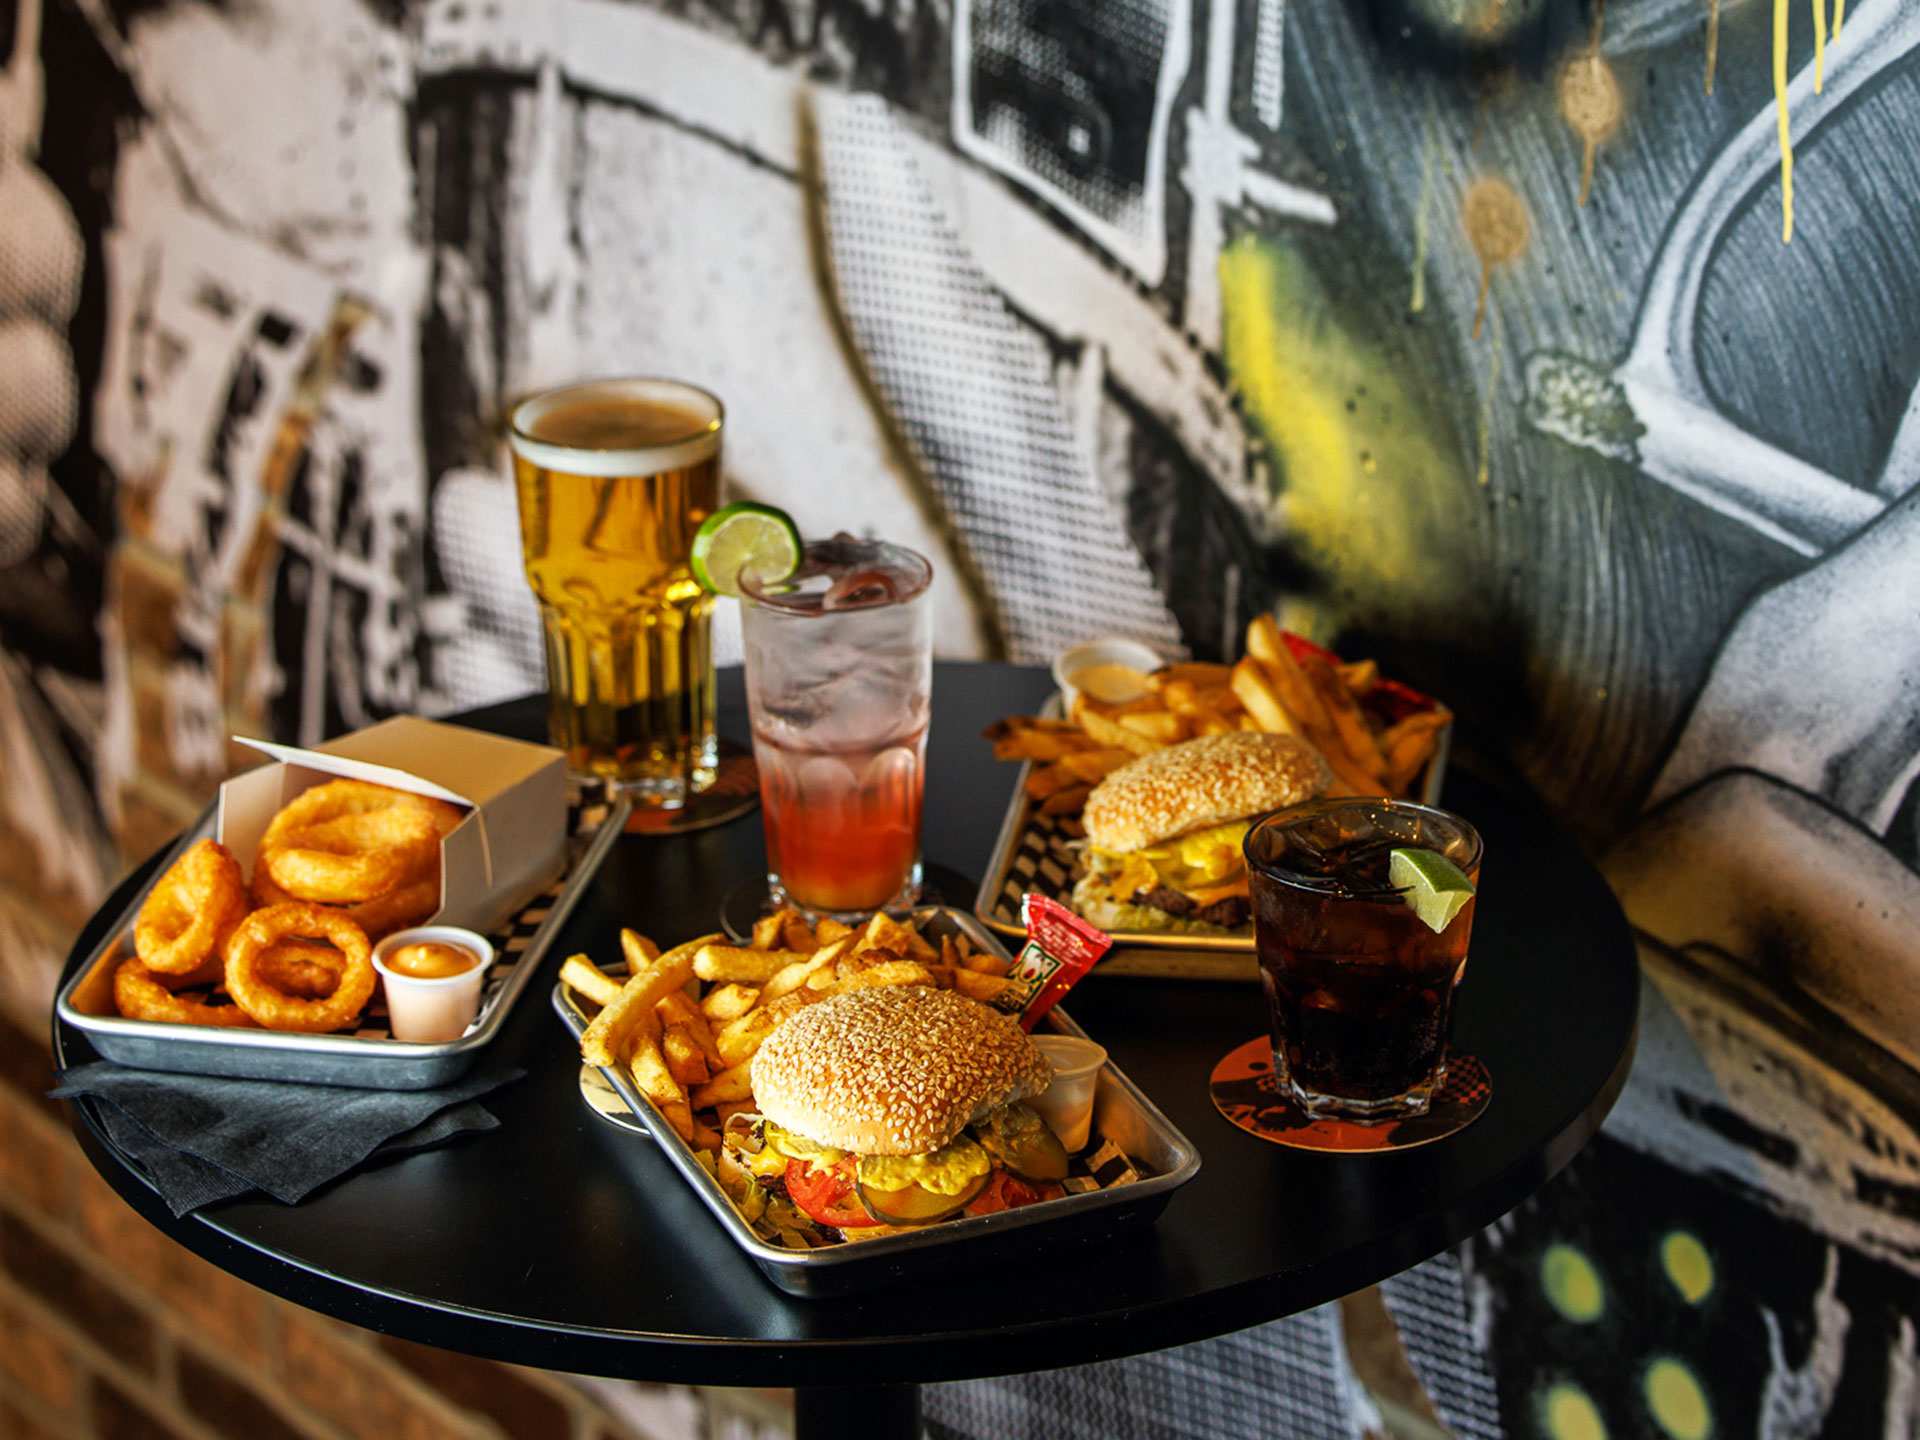 Best restaurants and bars around King West | Burgers and fries at The Black Pearl